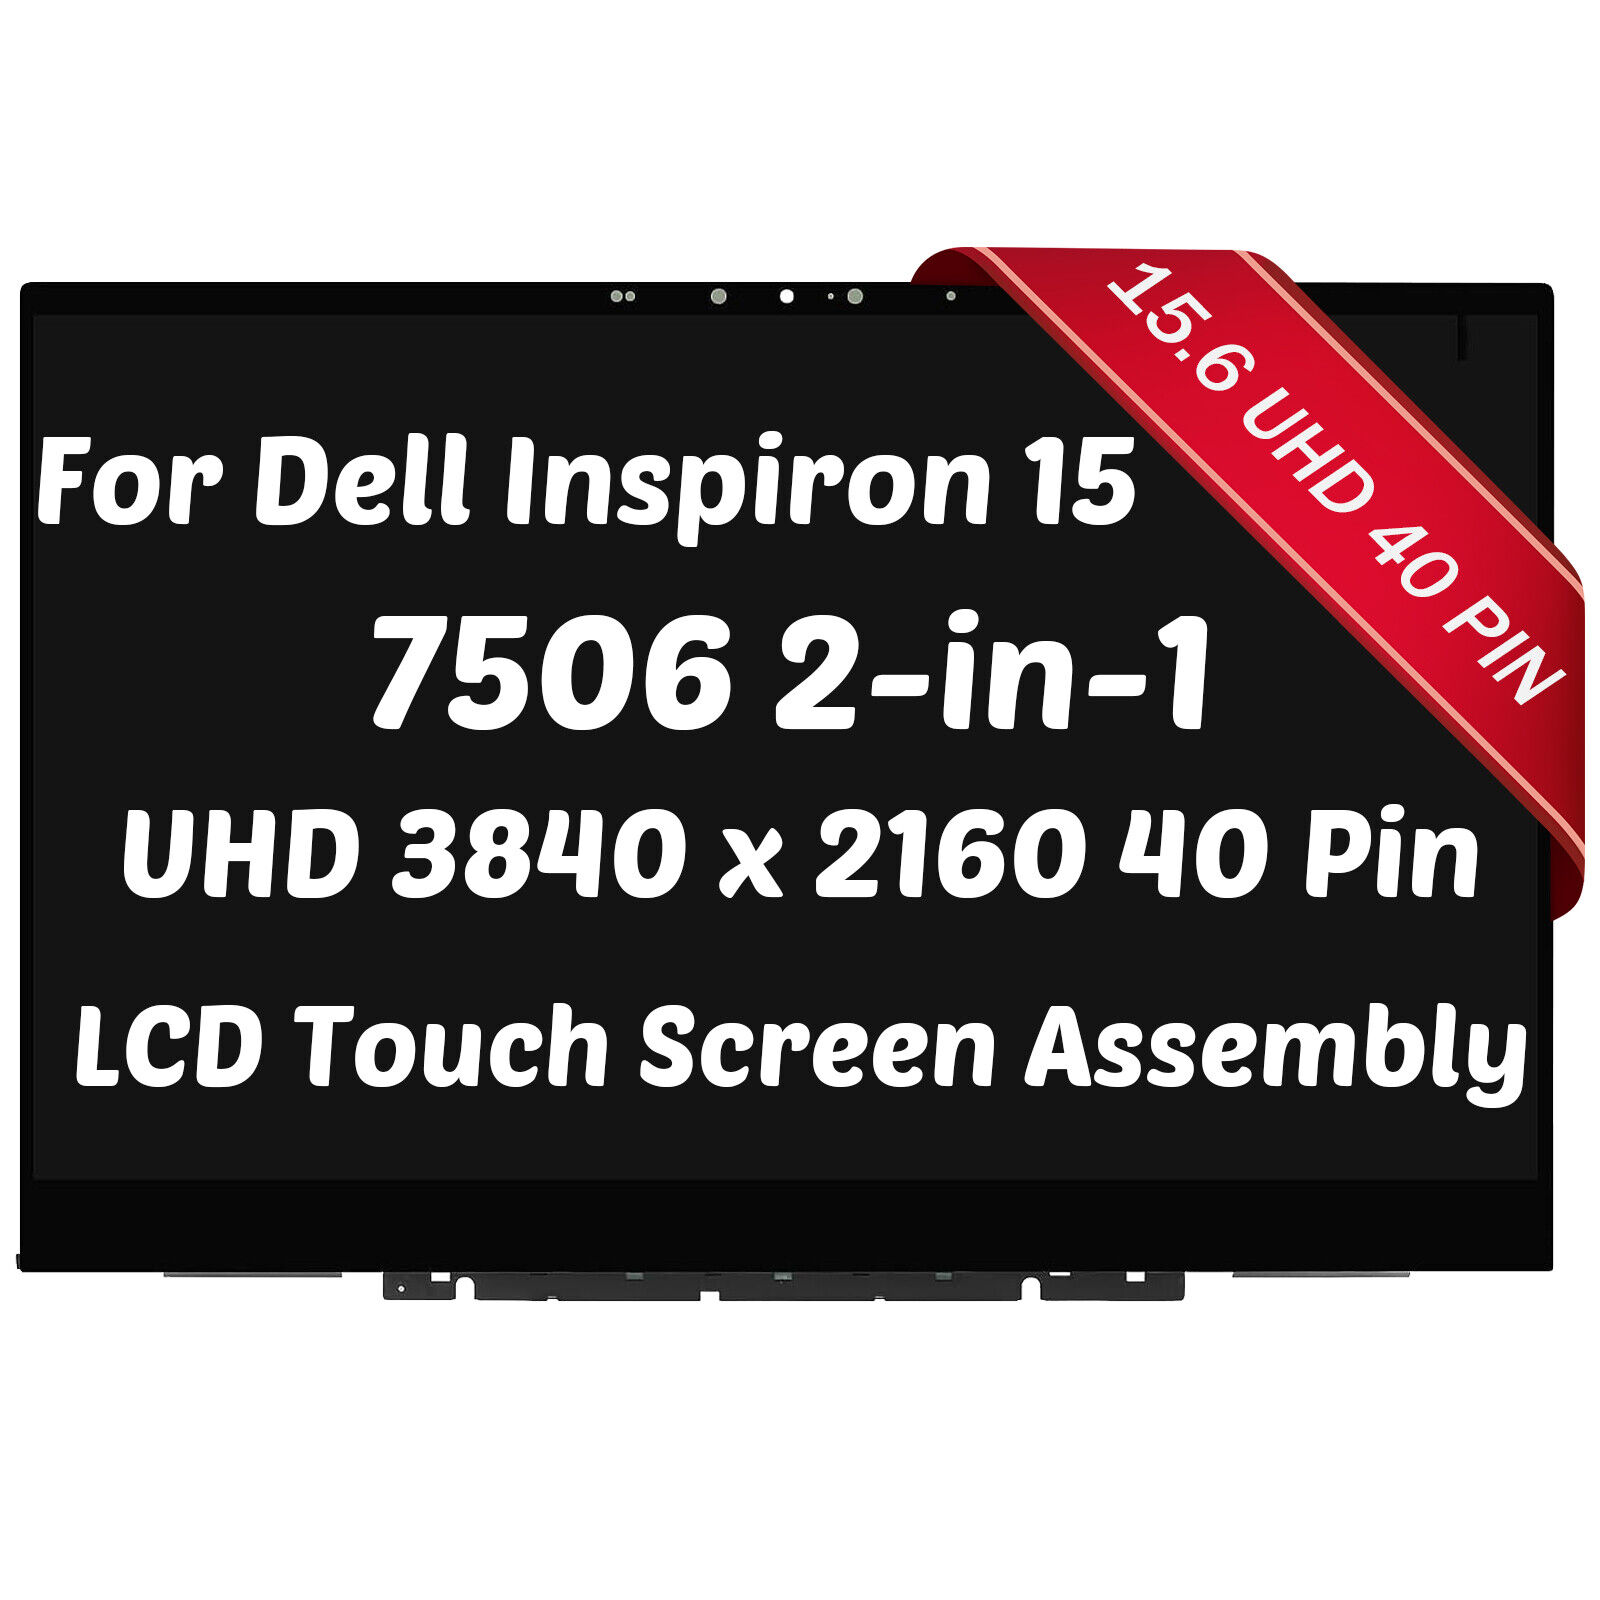 UHD 3840x2160 LCD Touch Screen Assembly for Dell Inspiron 15 7506 F5X01 0F5X01